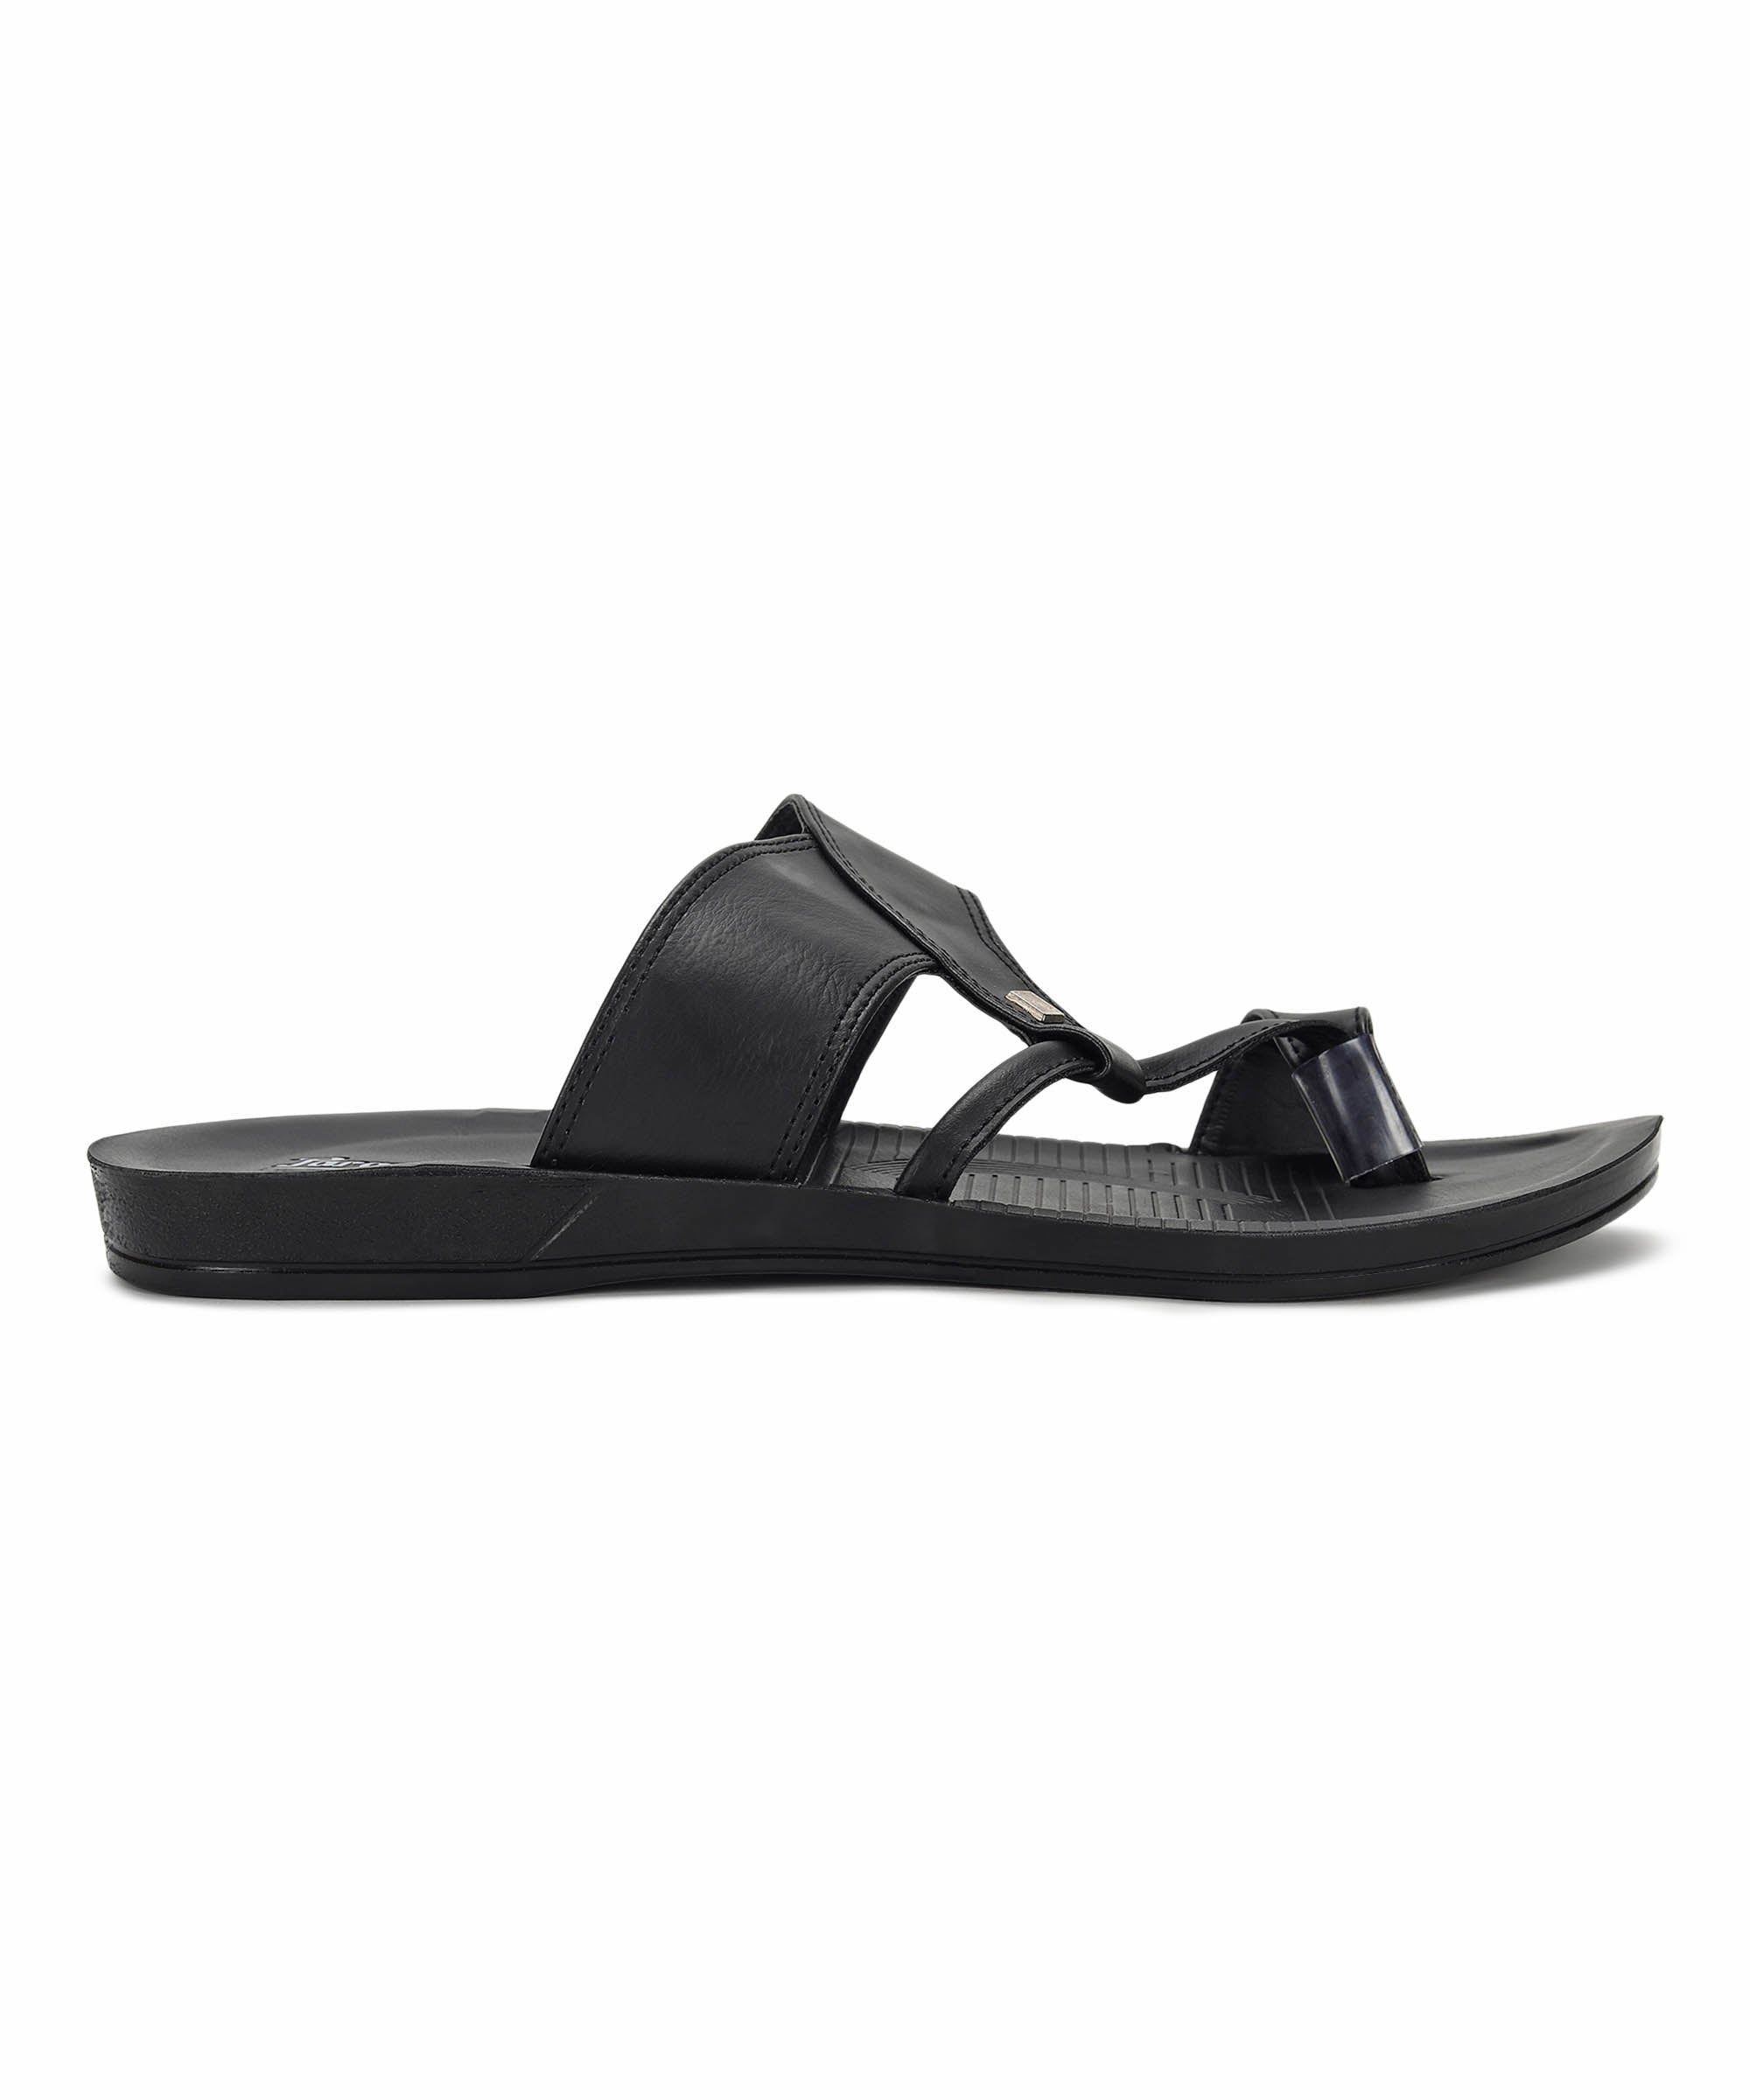 Paragon PUK2221G  Men Stylish Sandals | Comfortable Sandals for Daily Outdoor Use | Casual Formal Sandals with Cushioned Soles